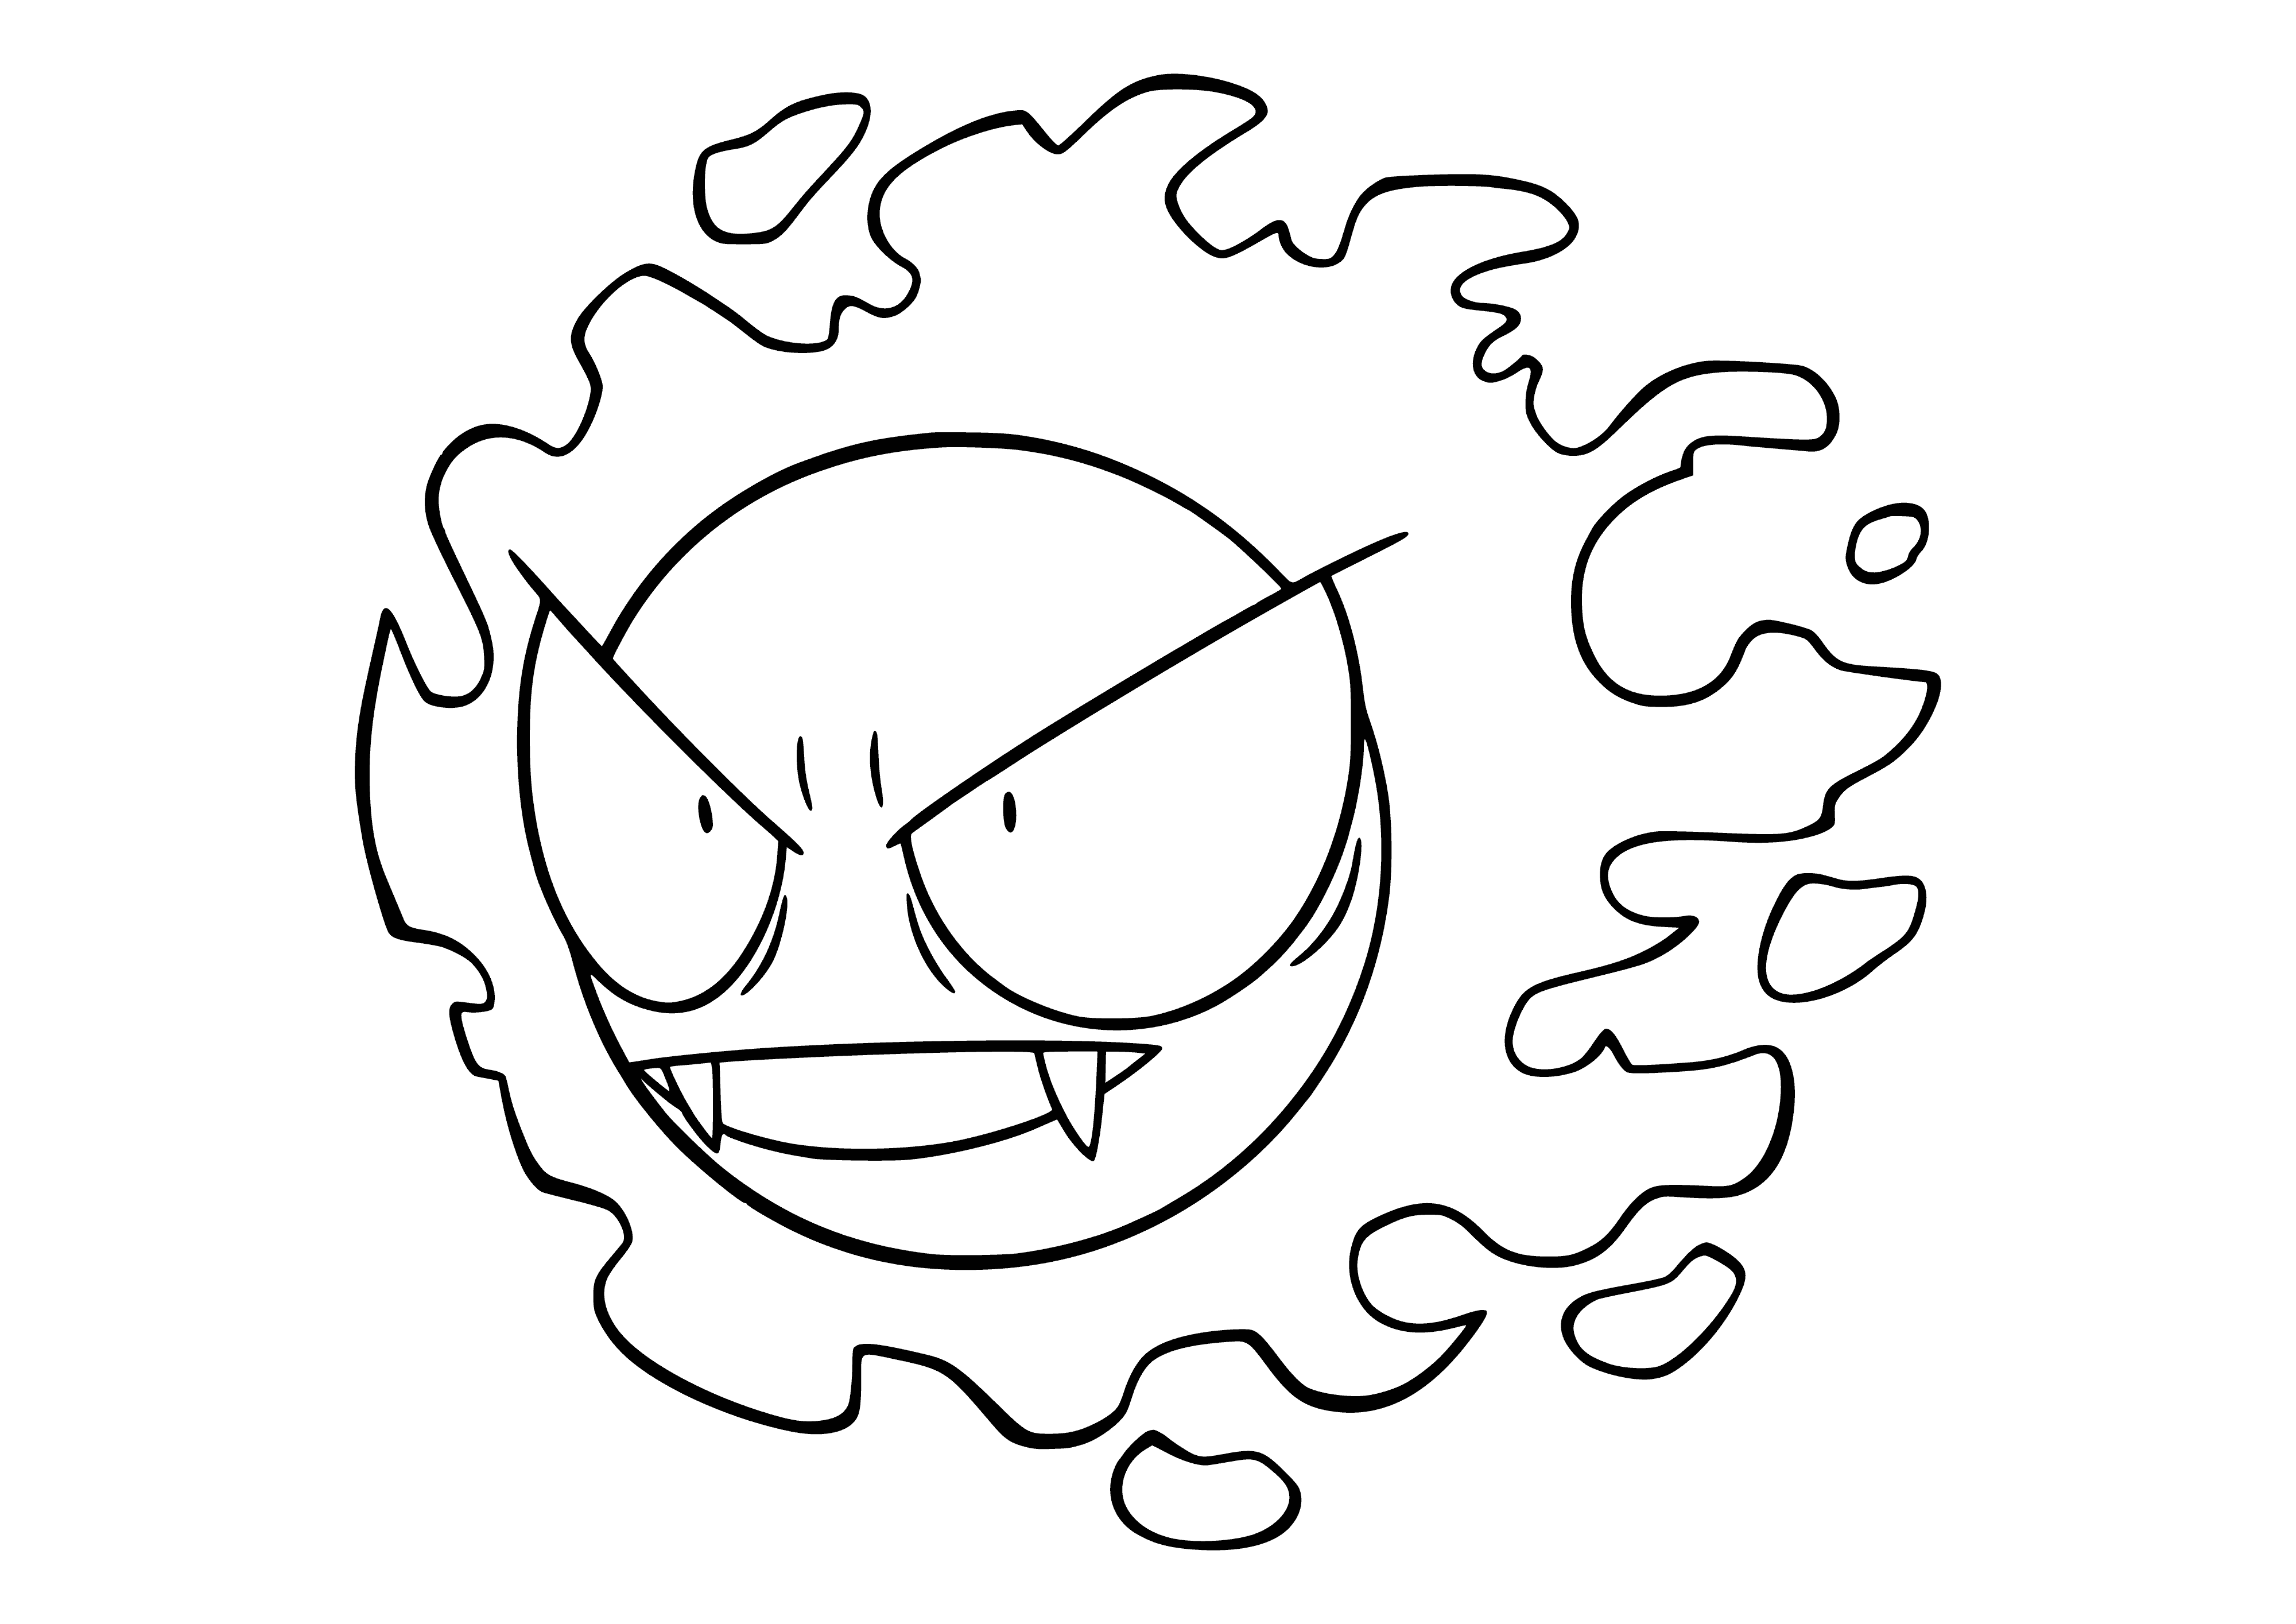 coloring page: Gastli is a small, white, rodent-like Pokemon with large black eyes, two small ears and a long tail. Evolves from Gastly.